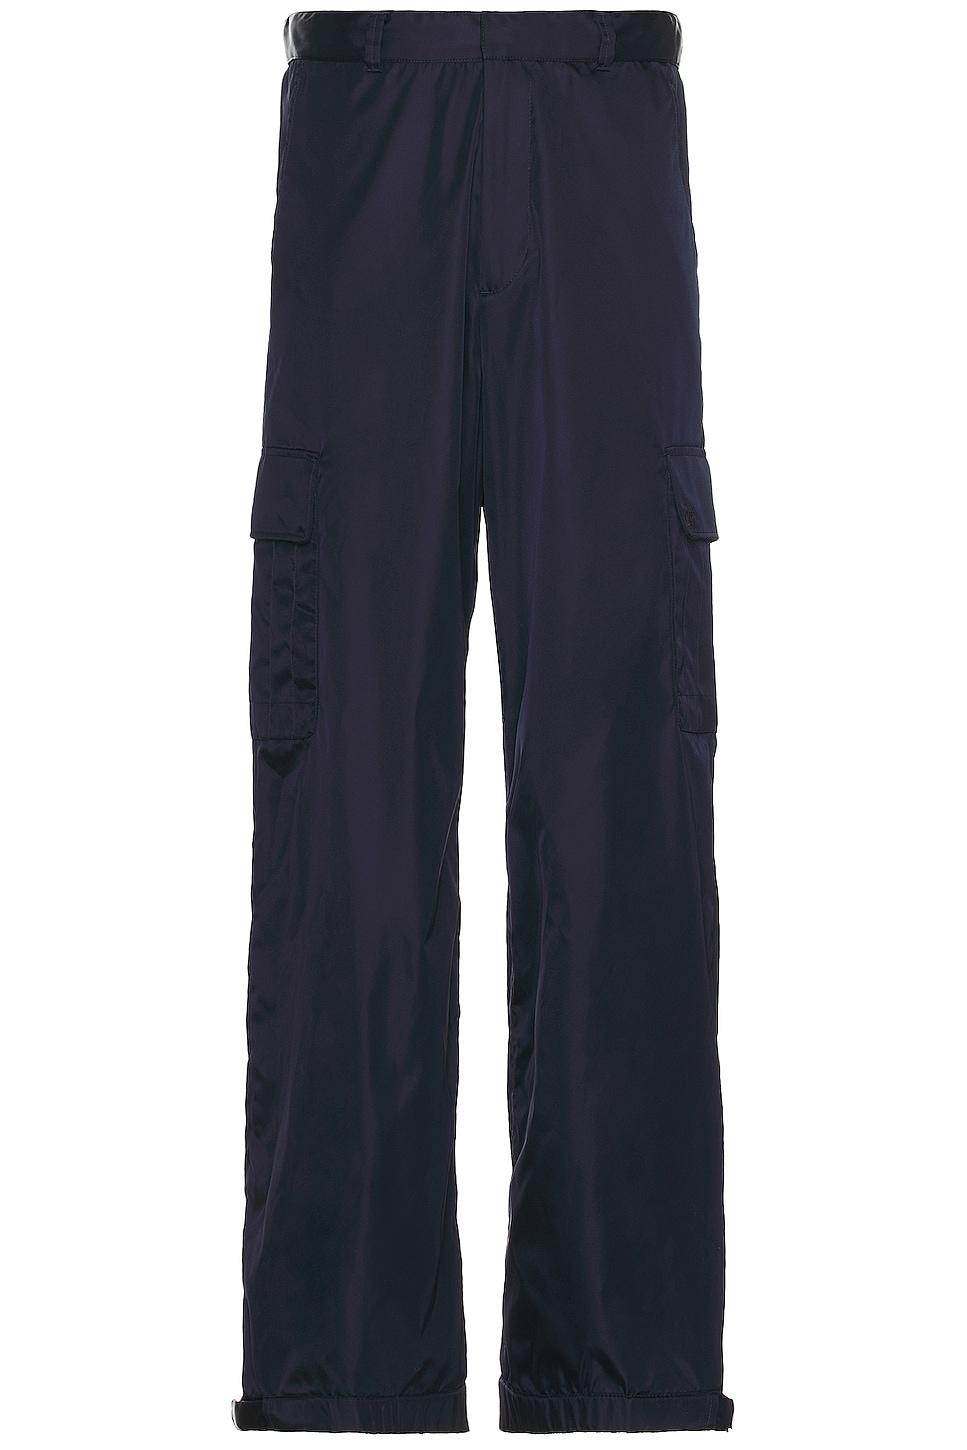 Image 1 of OFF-WHITE Nylon Cargo Pant in Sierre Leone